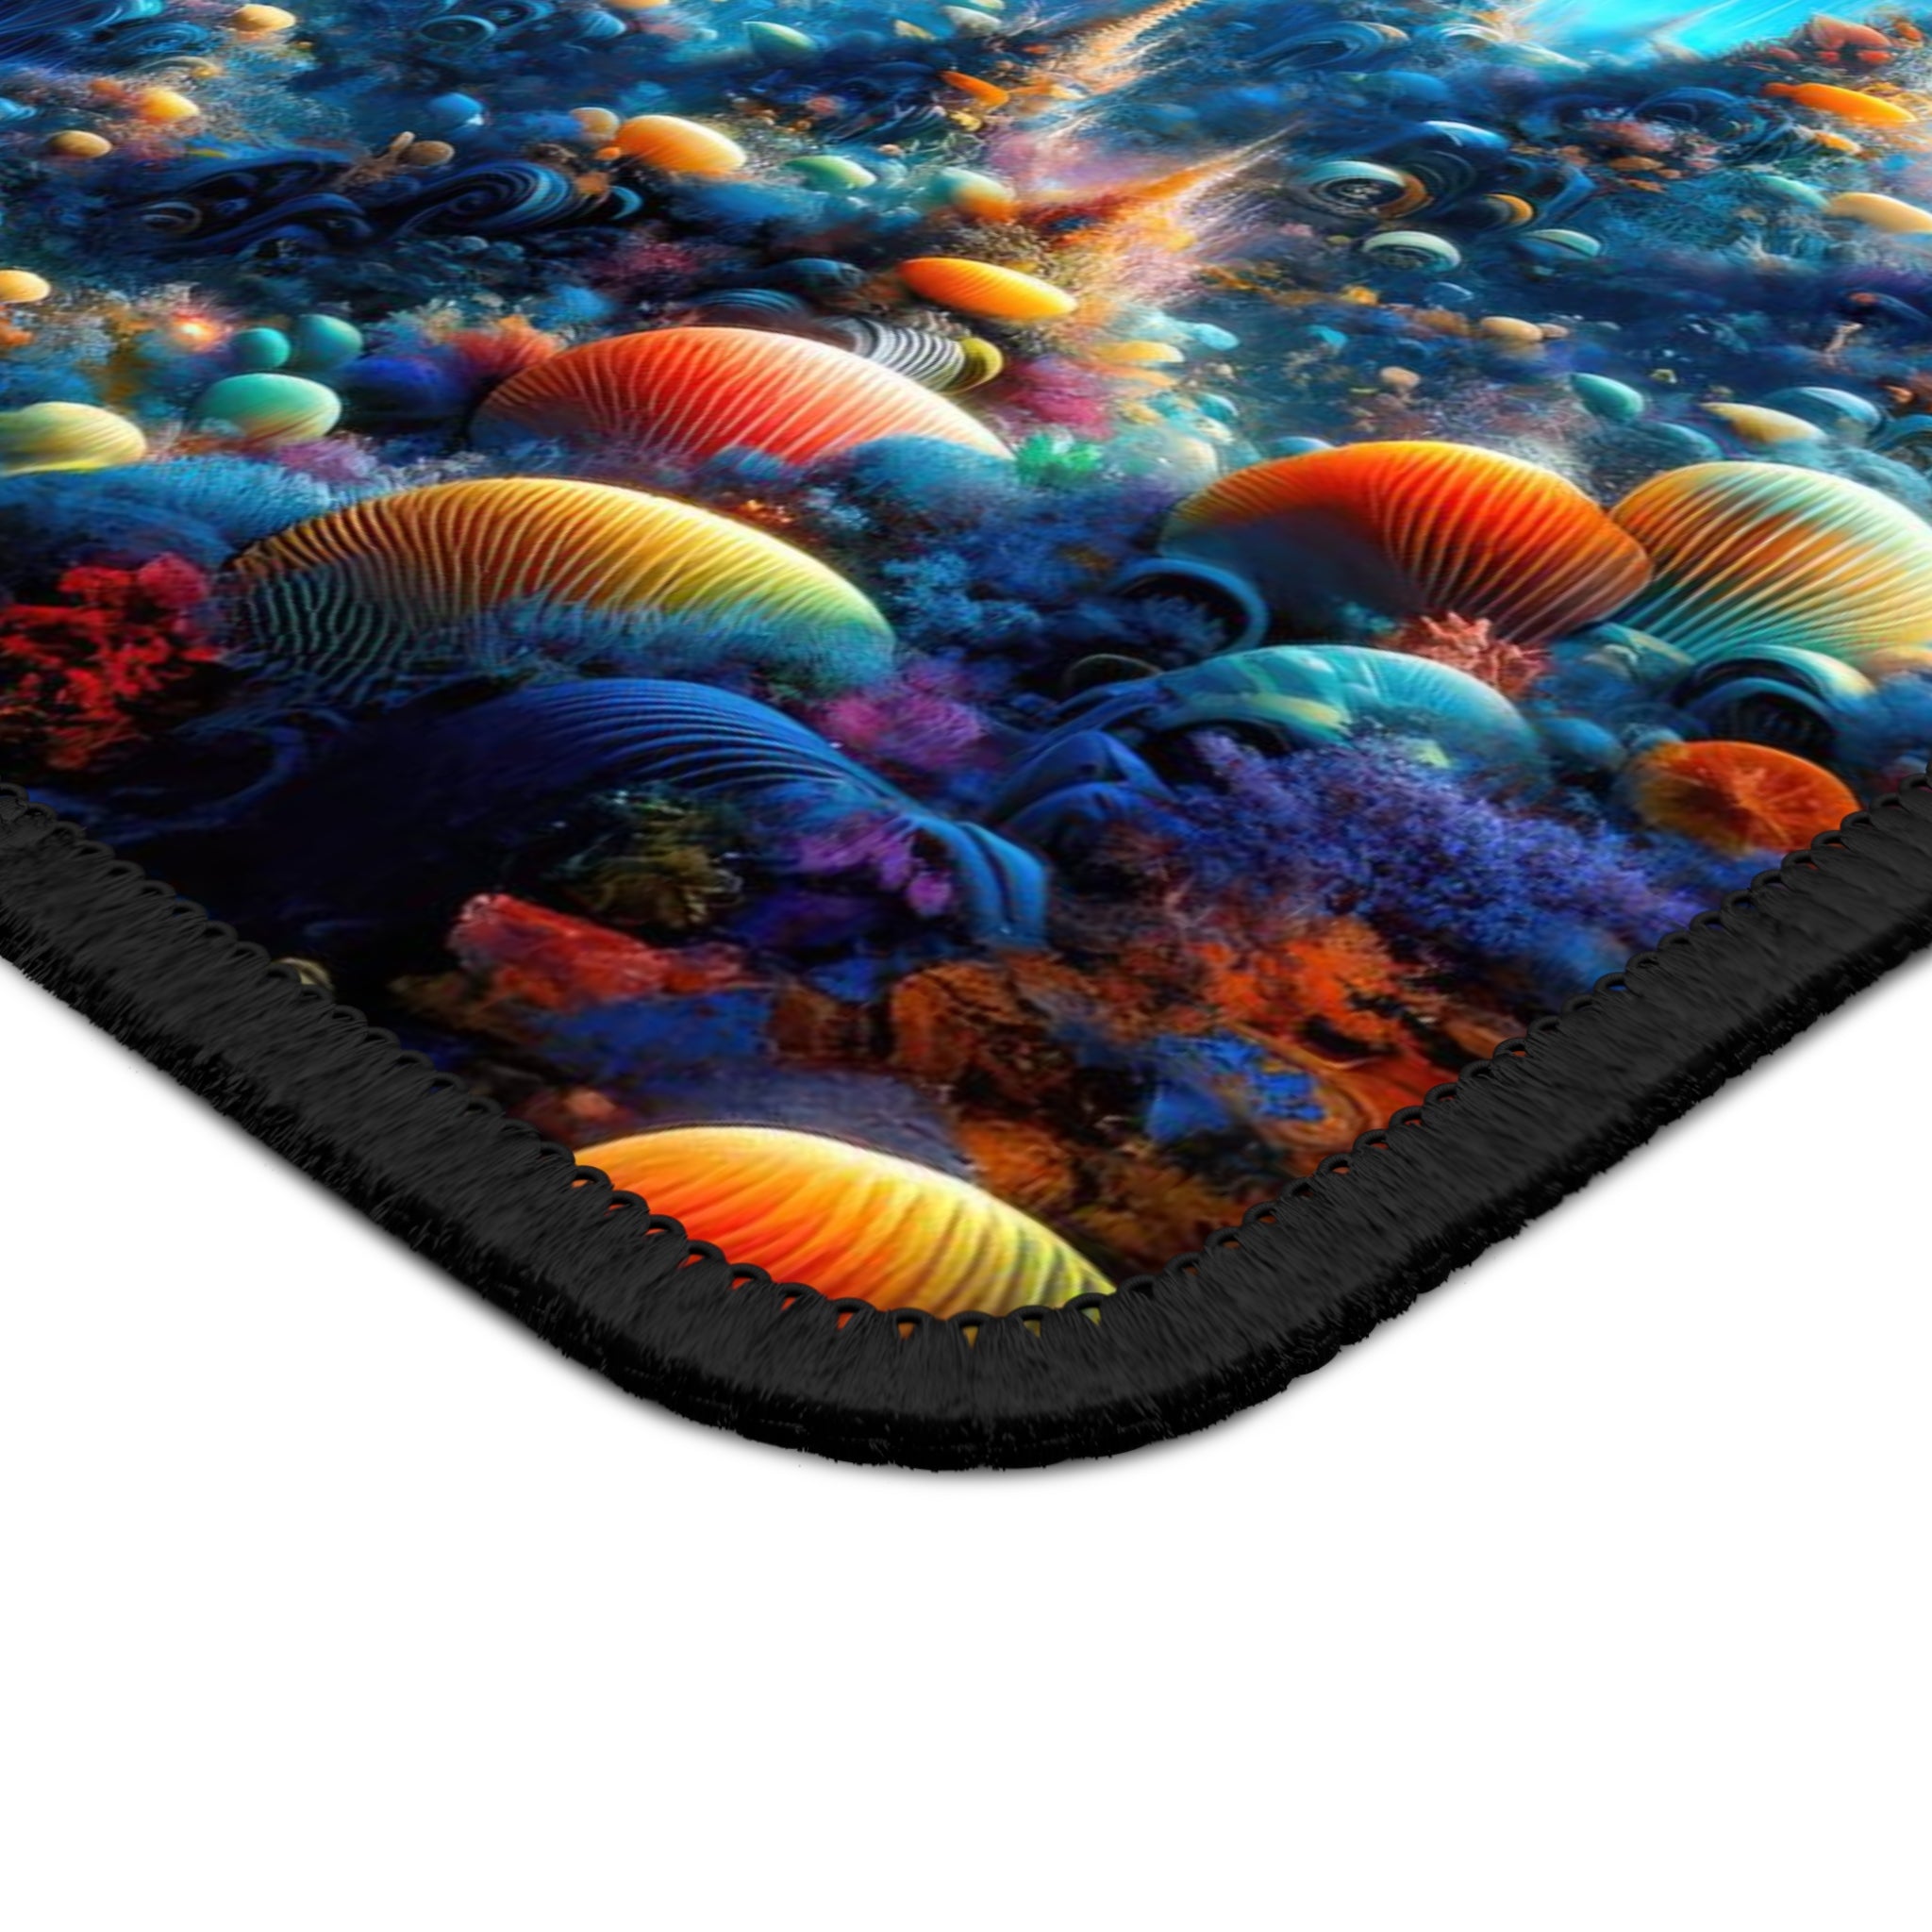 The Oracle of the Oceanic Opus Gaming Mouse Pad